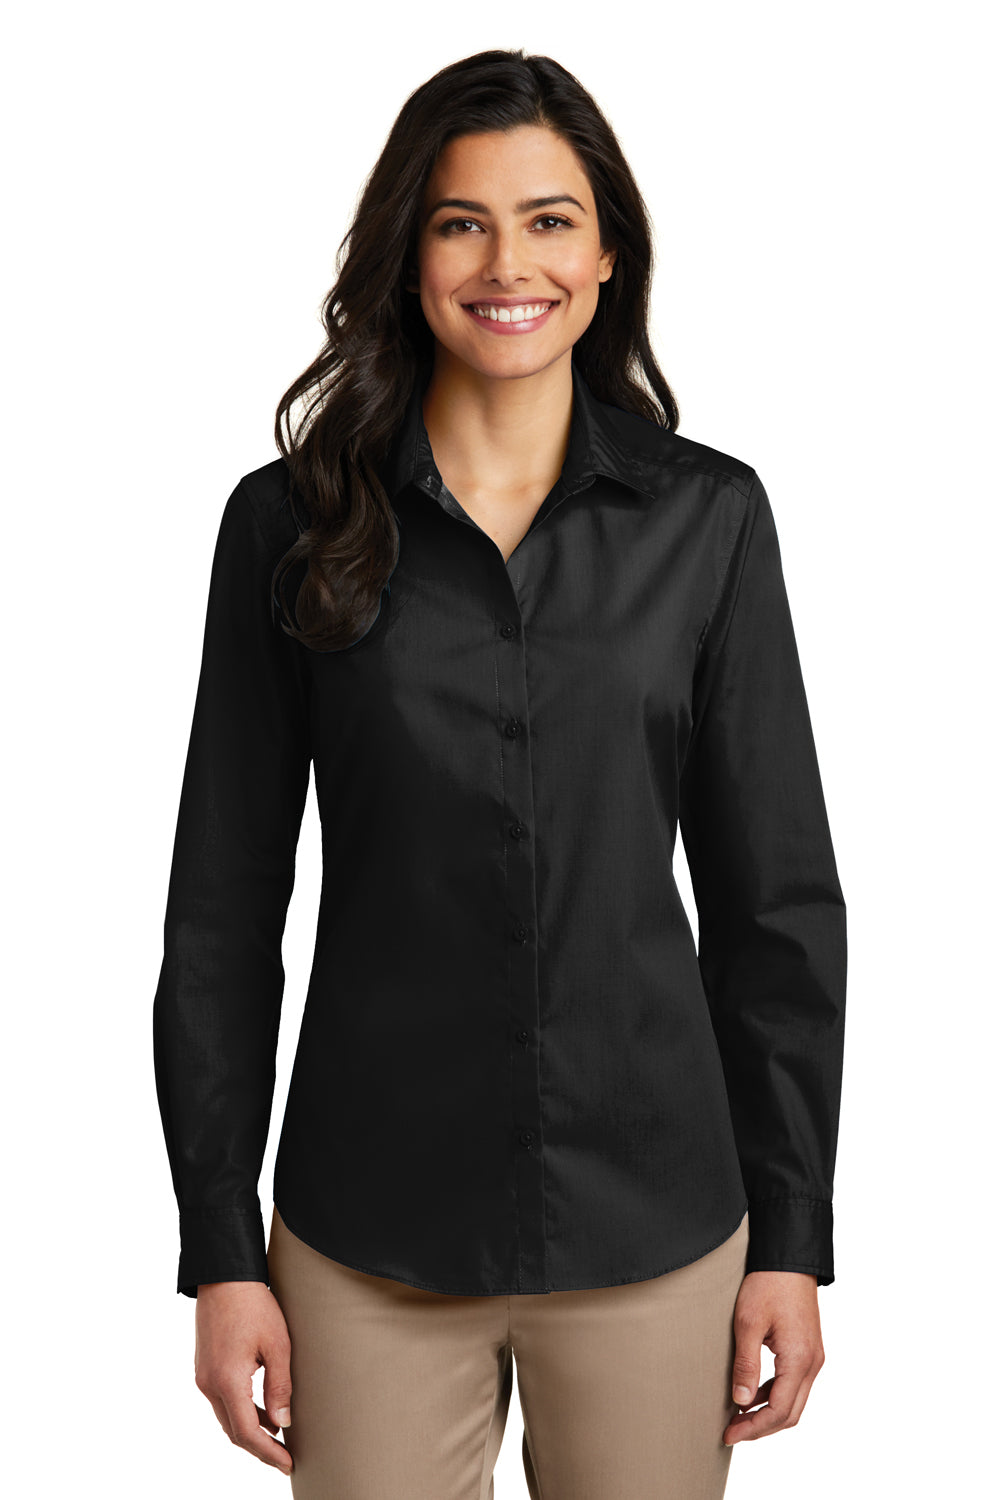 Port Authority LW100 Womens Carefree Stain Resistant Long Sleeve Button Down Shirt Deep Black Front